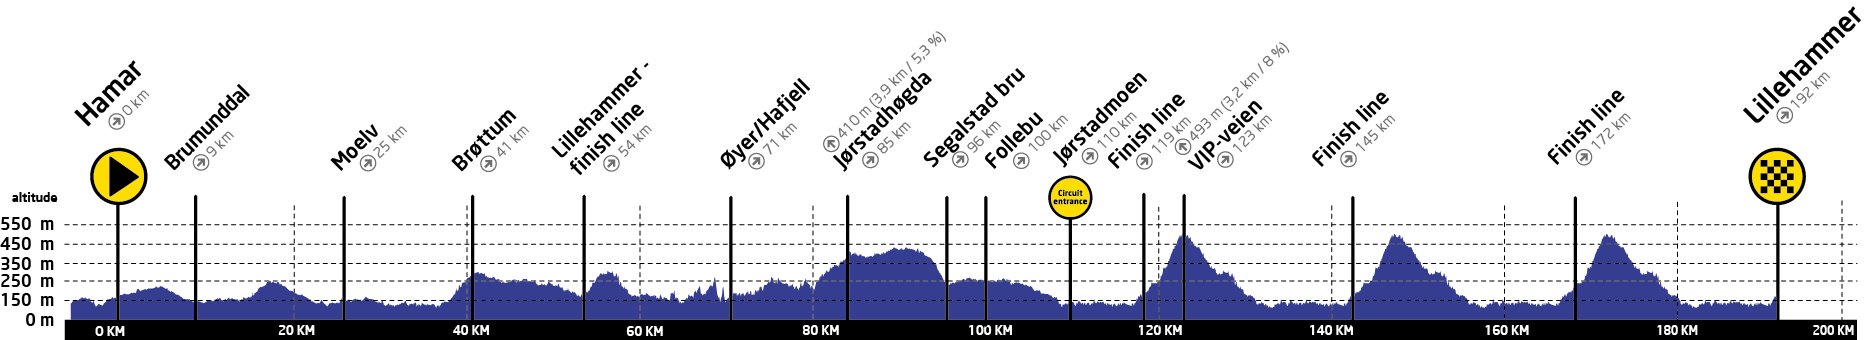 tour-of-norway-2017-stage-3-profile.jpeg